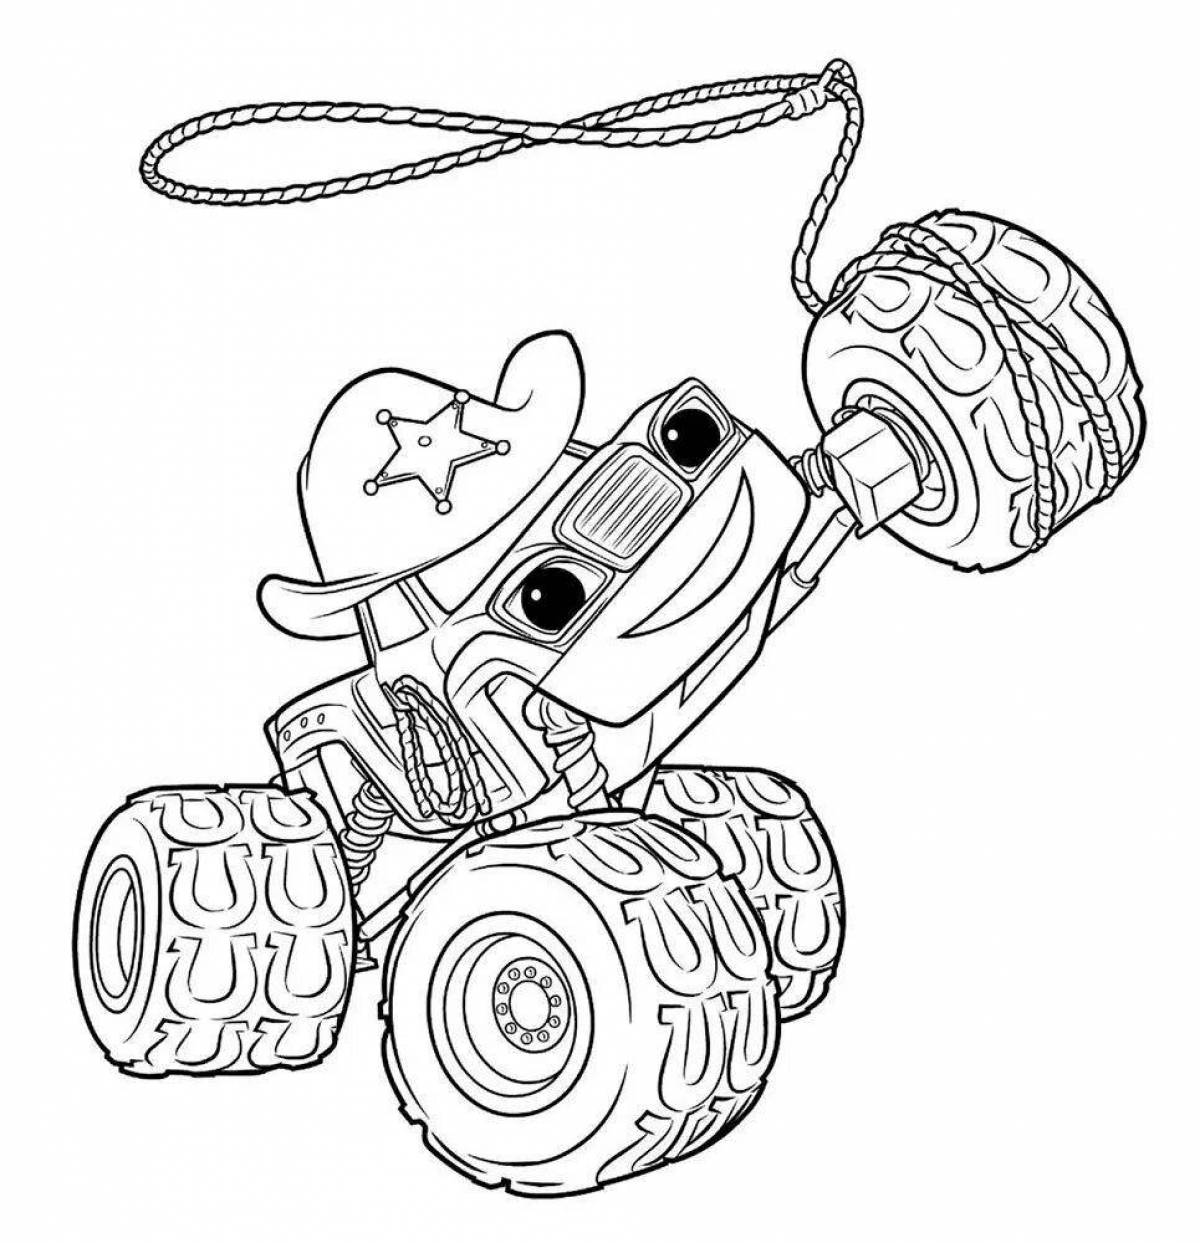 Fun flash and wonder cars coloring pages for kids